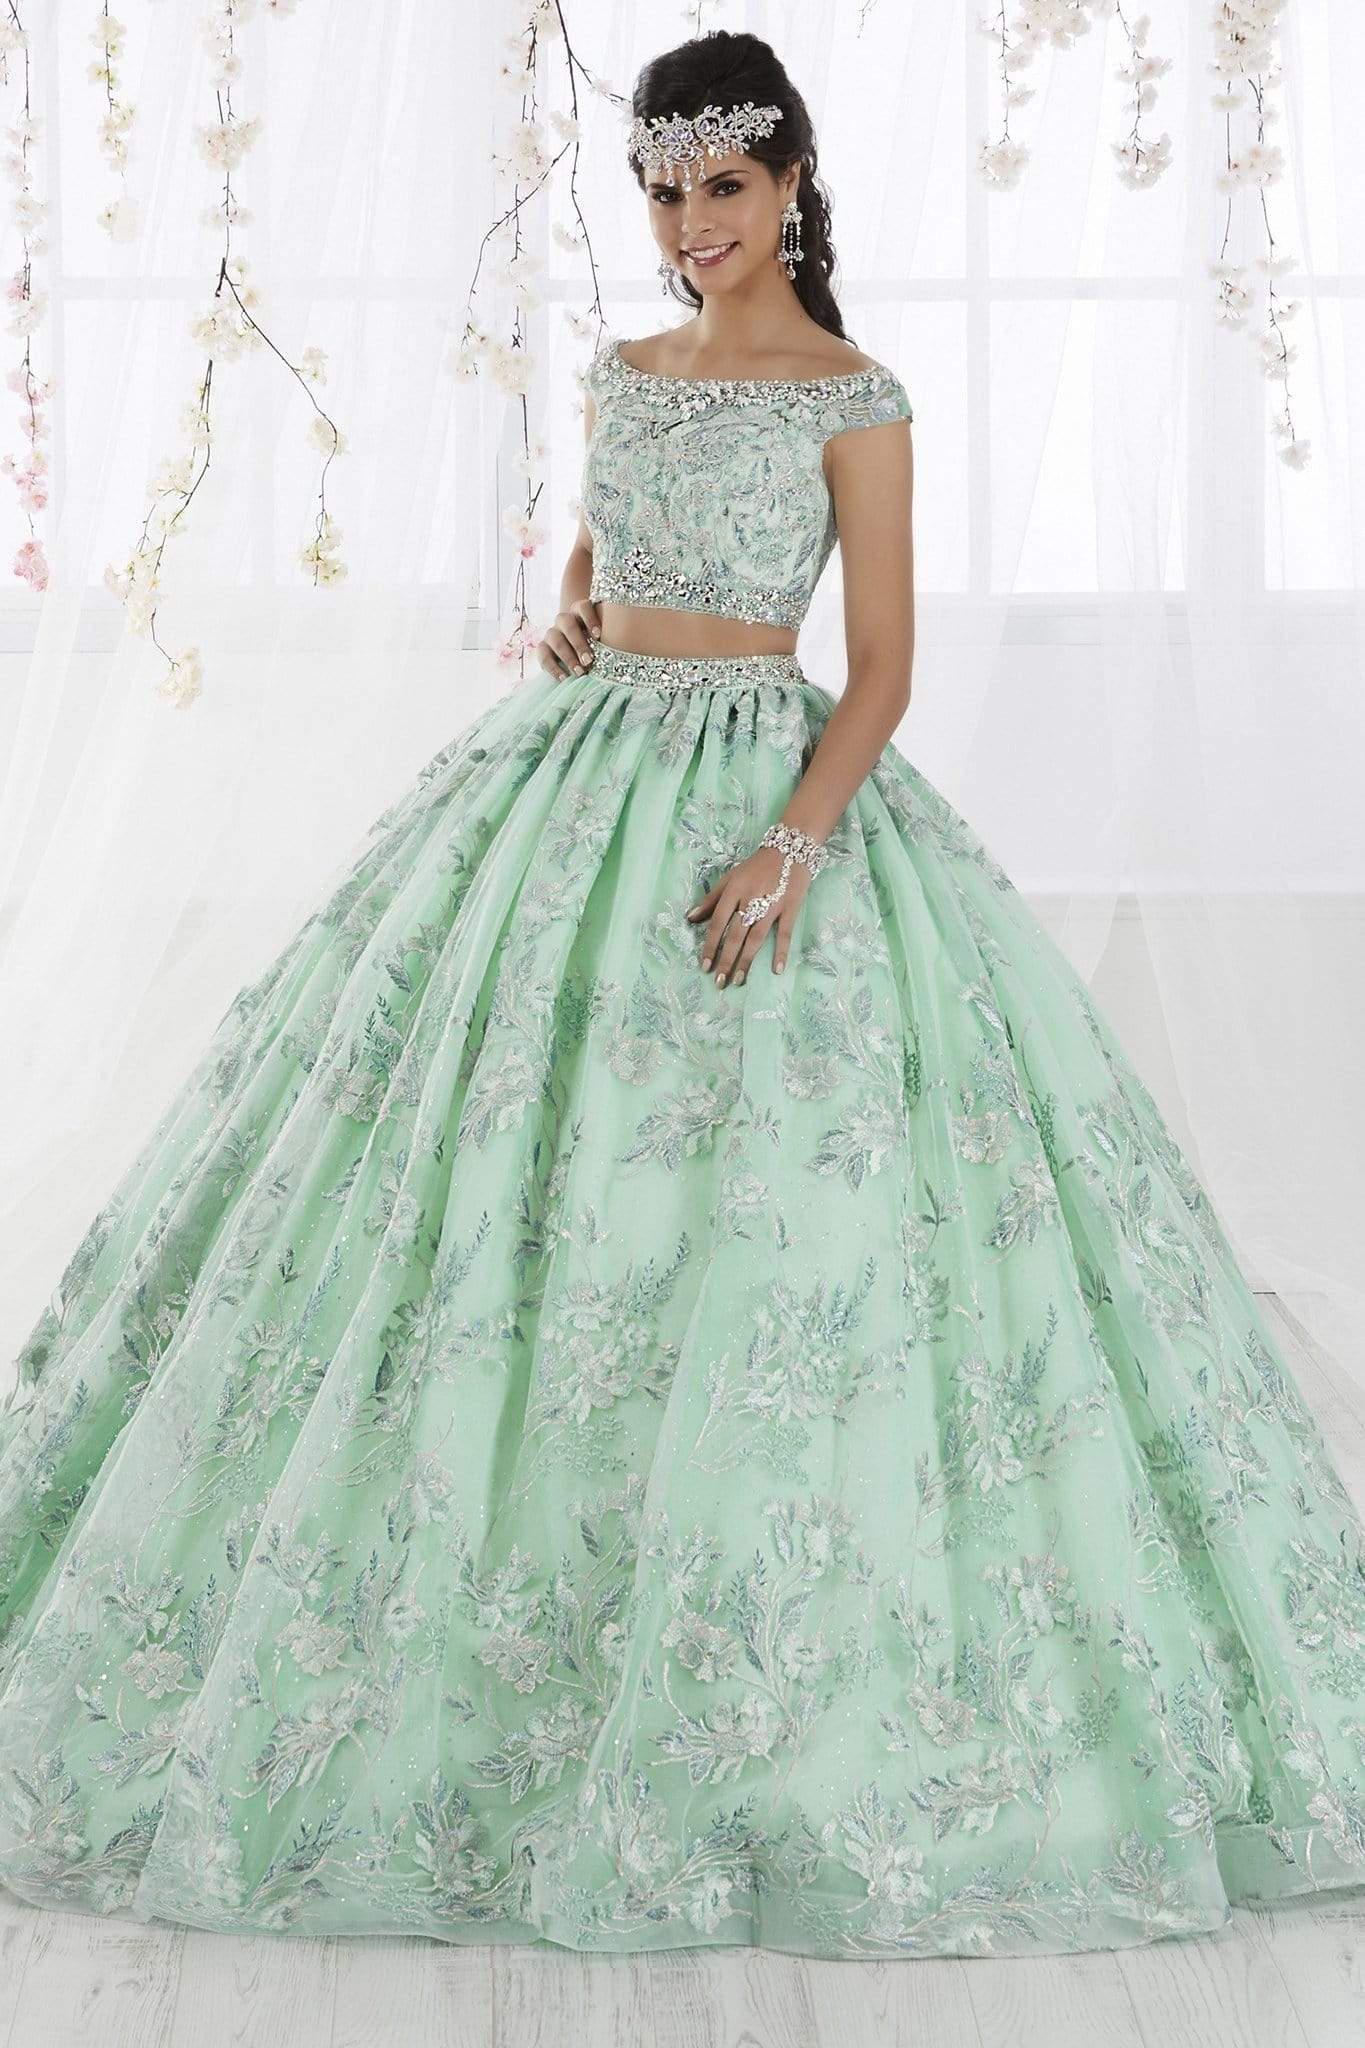 Fiesta Gowns - 56370 Two Piece Floral Off-Shoulder Ballgown Special Occasion Dress 0 / Aqua